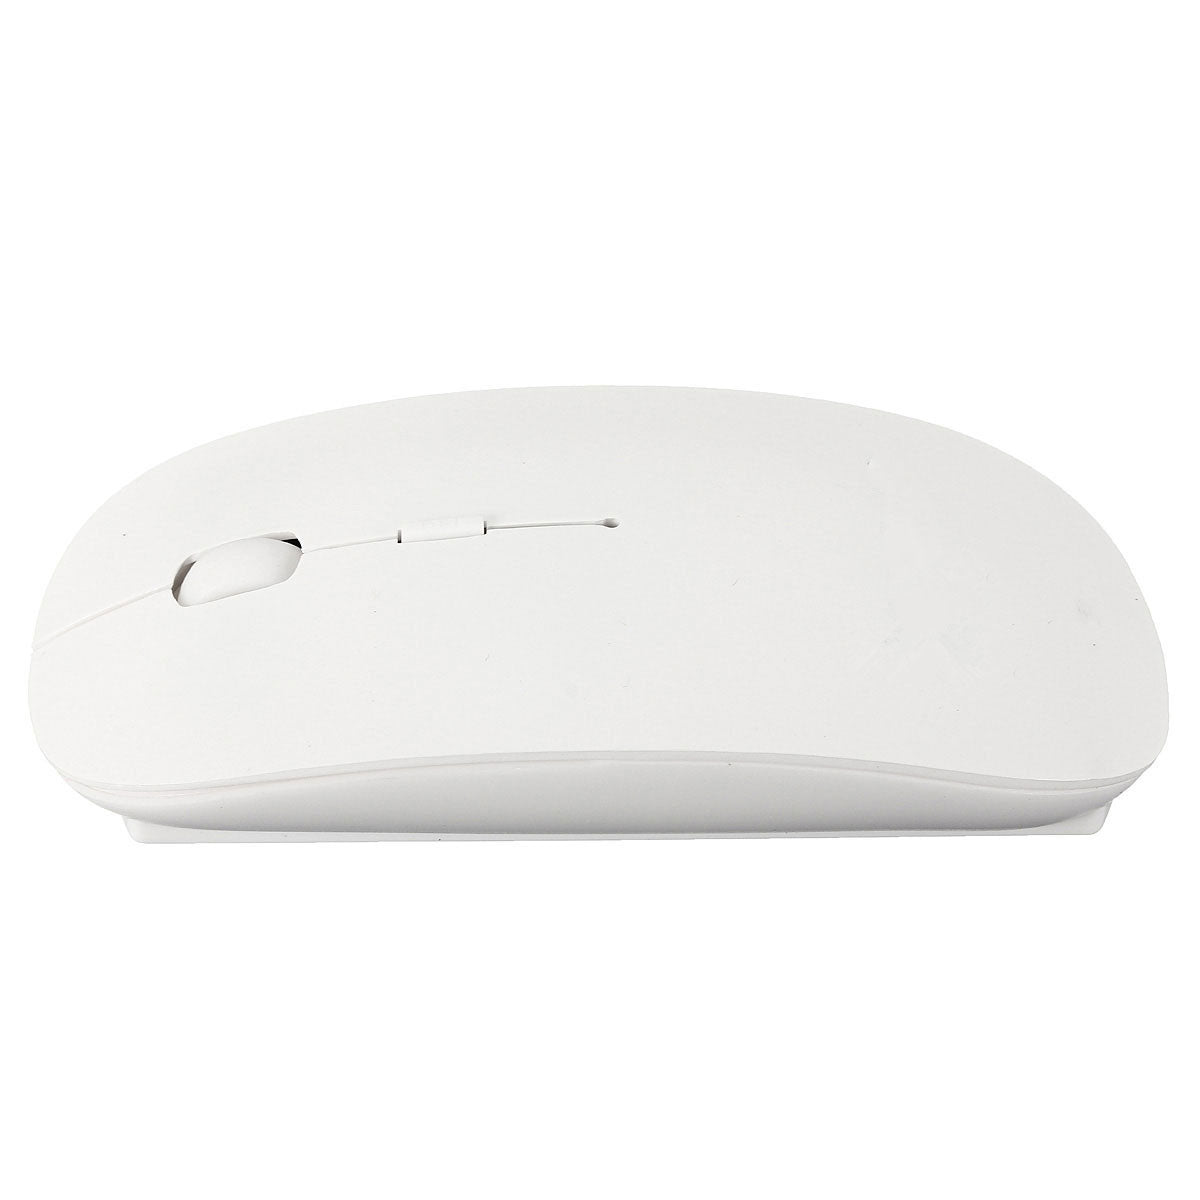 Slim bluetooth 3.0 Wireless Mouse for PC Android 3.1 + Tablets